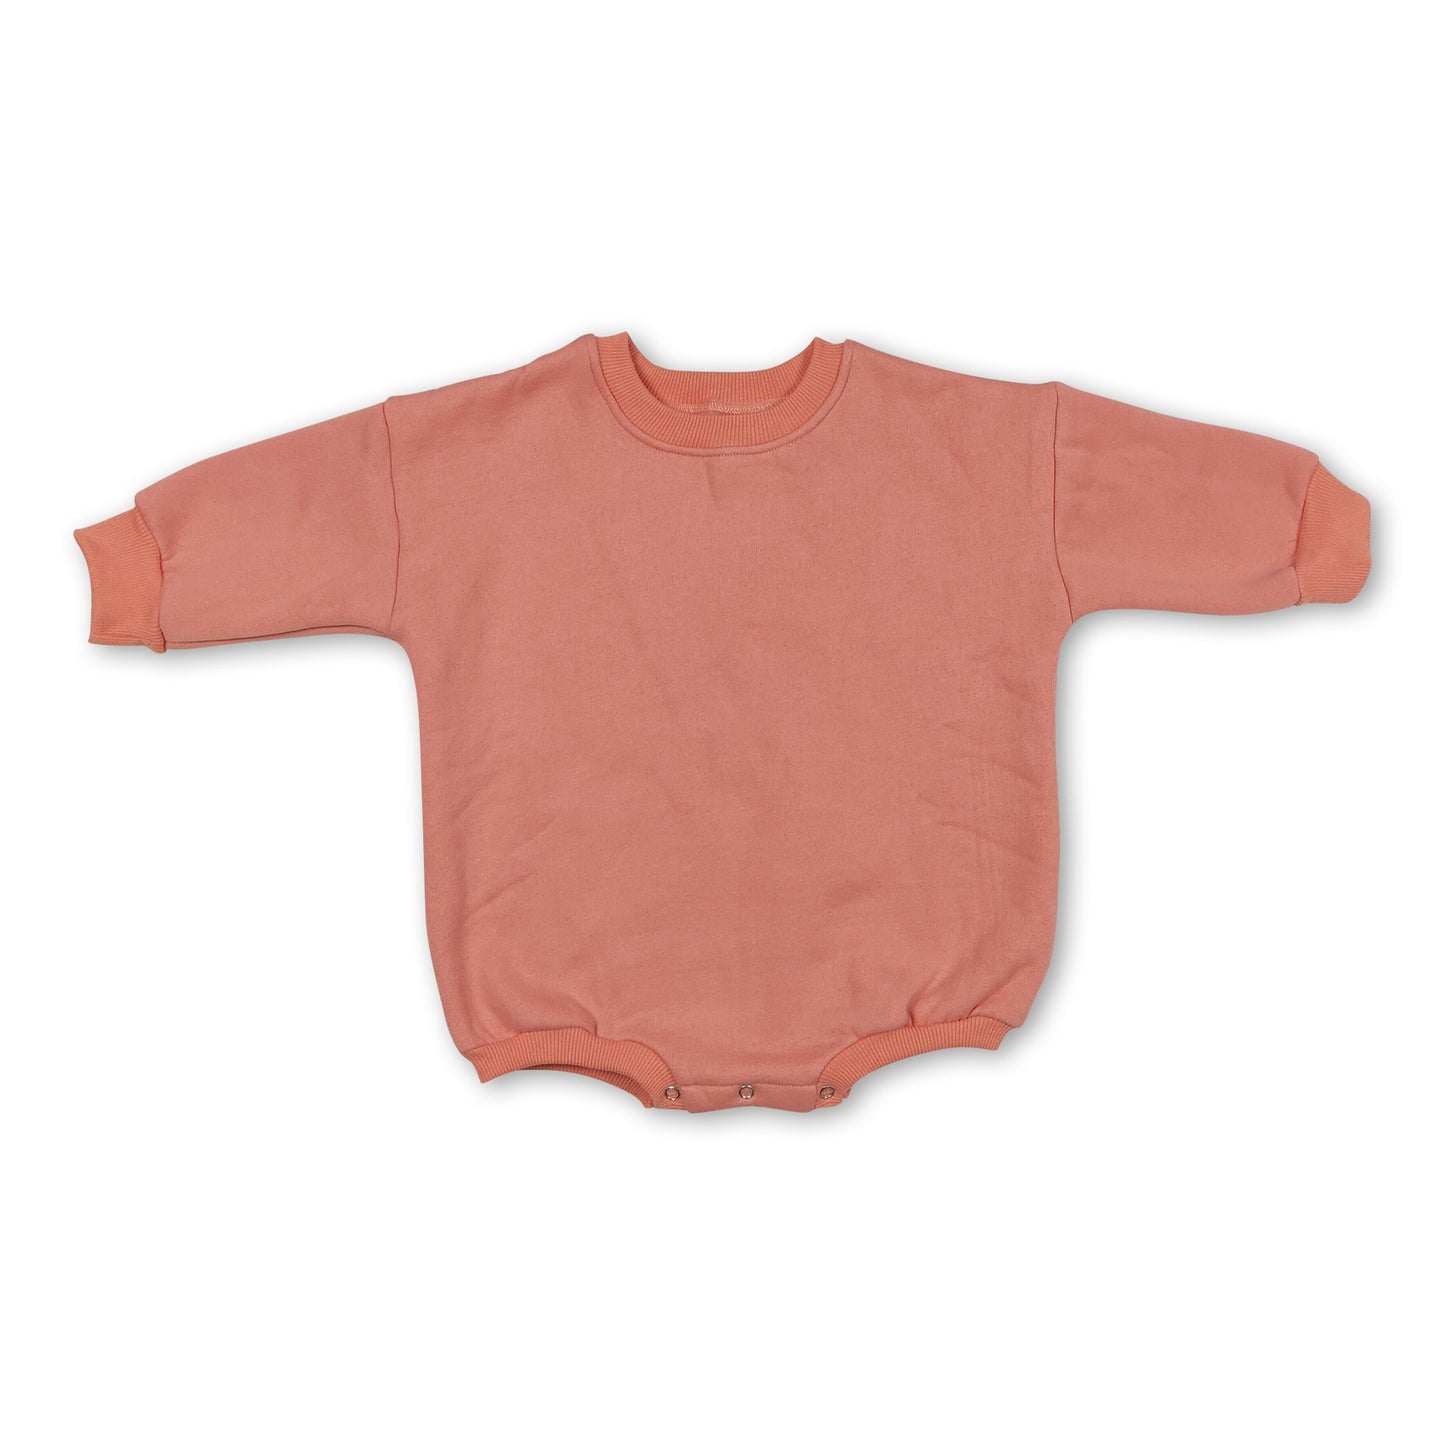 Peach cotton long sleeves baby sweat romper